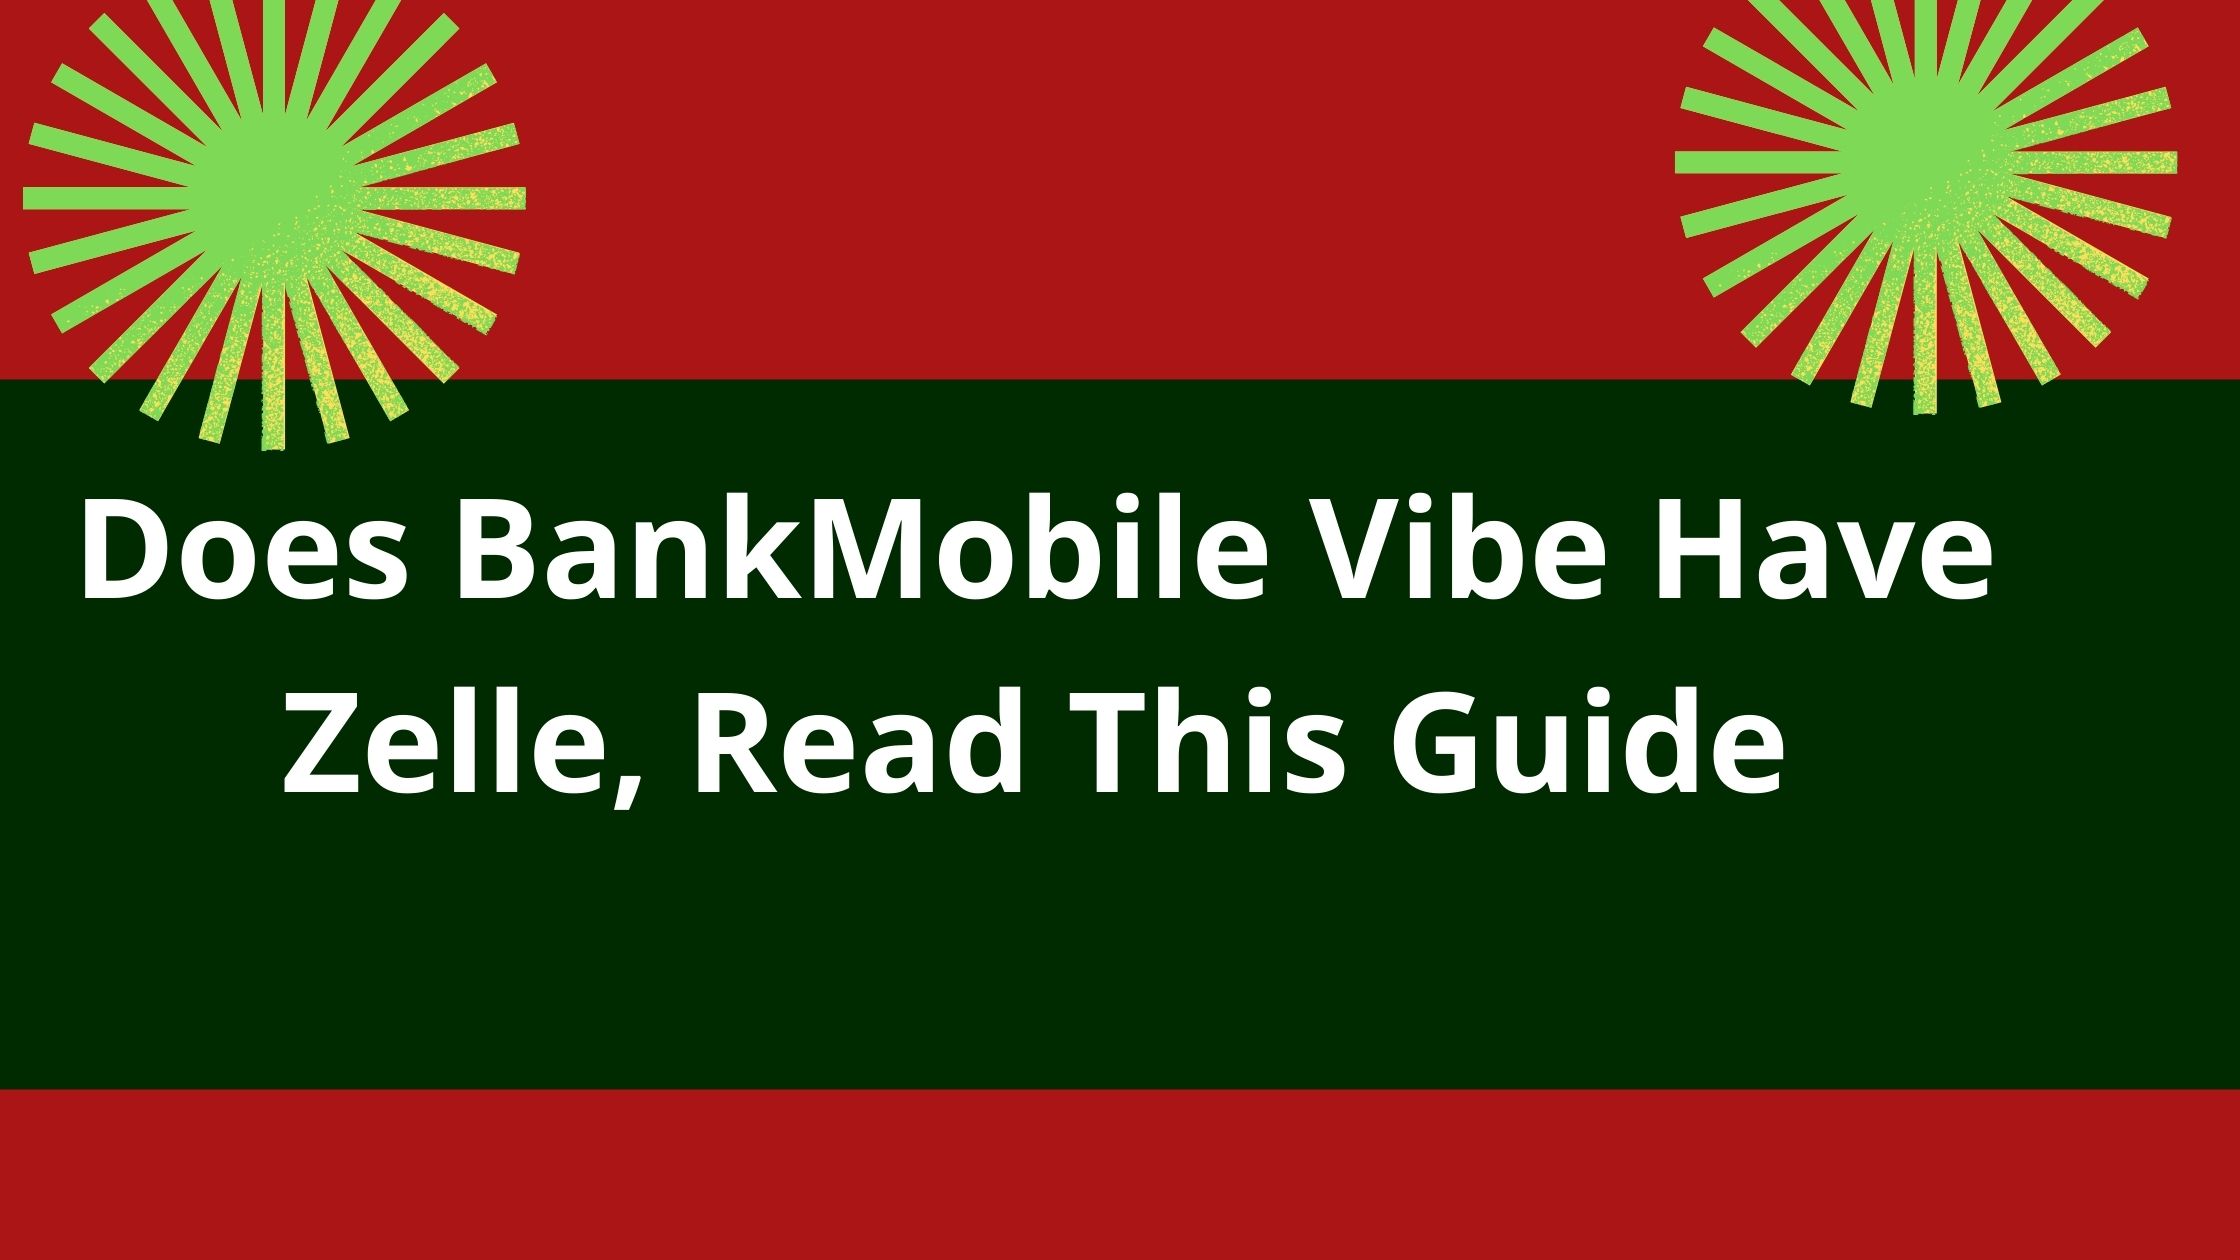 Does BankMobile Vibe Have Zelle, Read This Guide